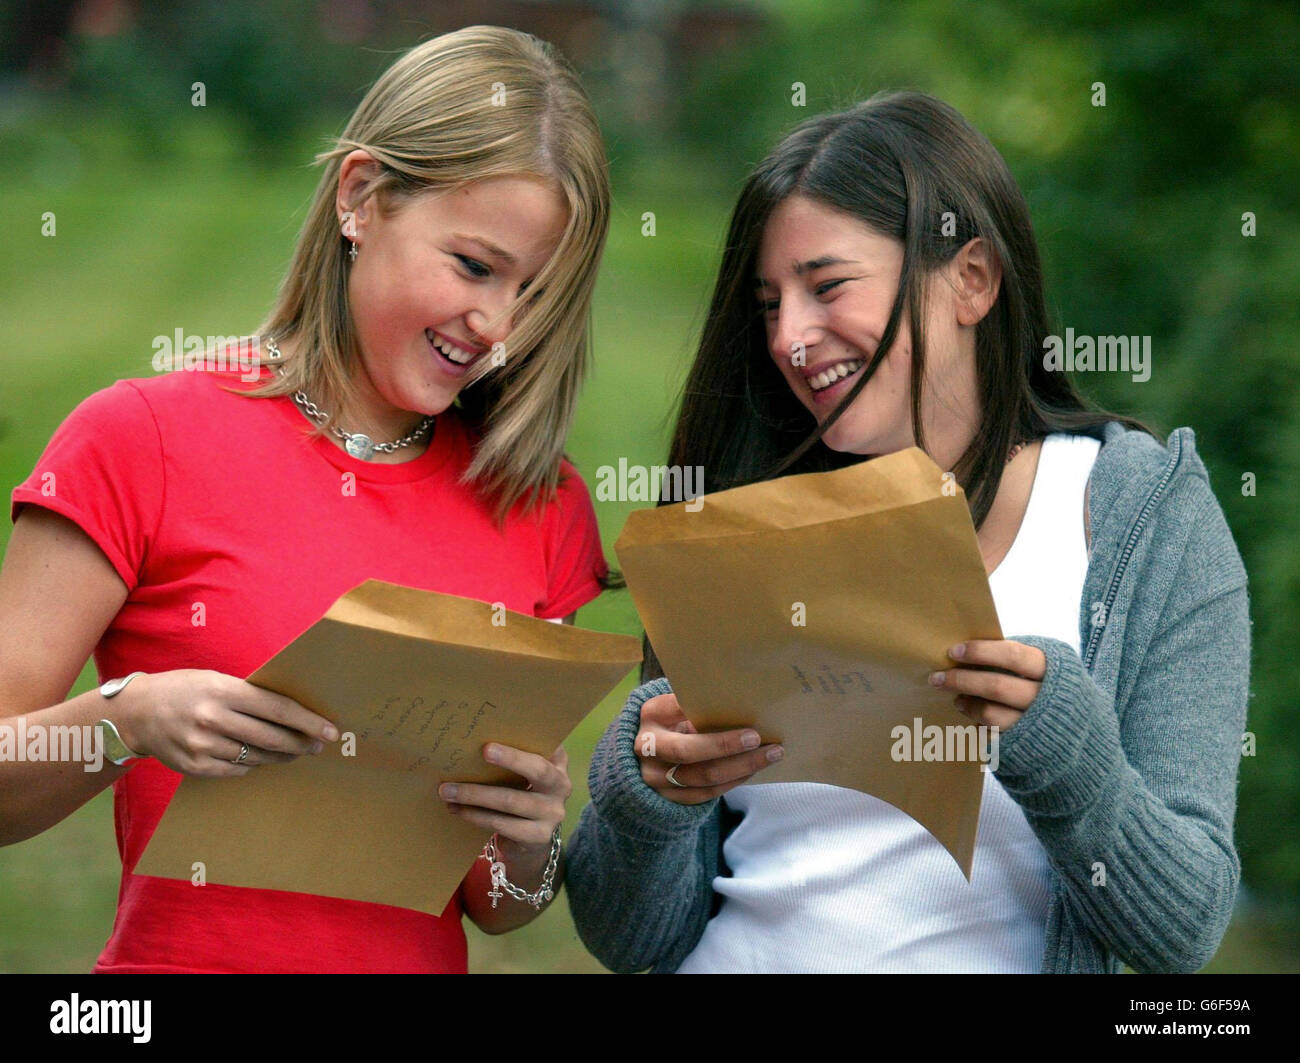 Lauren Wild (left) and Jessica Clempner smile as they open their GCSE results at Withington School for Girls in Manchester. Education Secretary Charles Clarke faced calls today to scrap GCSEs and replace them with a more flexible system, after figures showed the overall pass rate fell this year.The proportion of entrants awarded grades A* to G went down from 97.9% last year to 97.6%, while there was a fall in the number for maths GCSE scoring C or better. Stock Photo